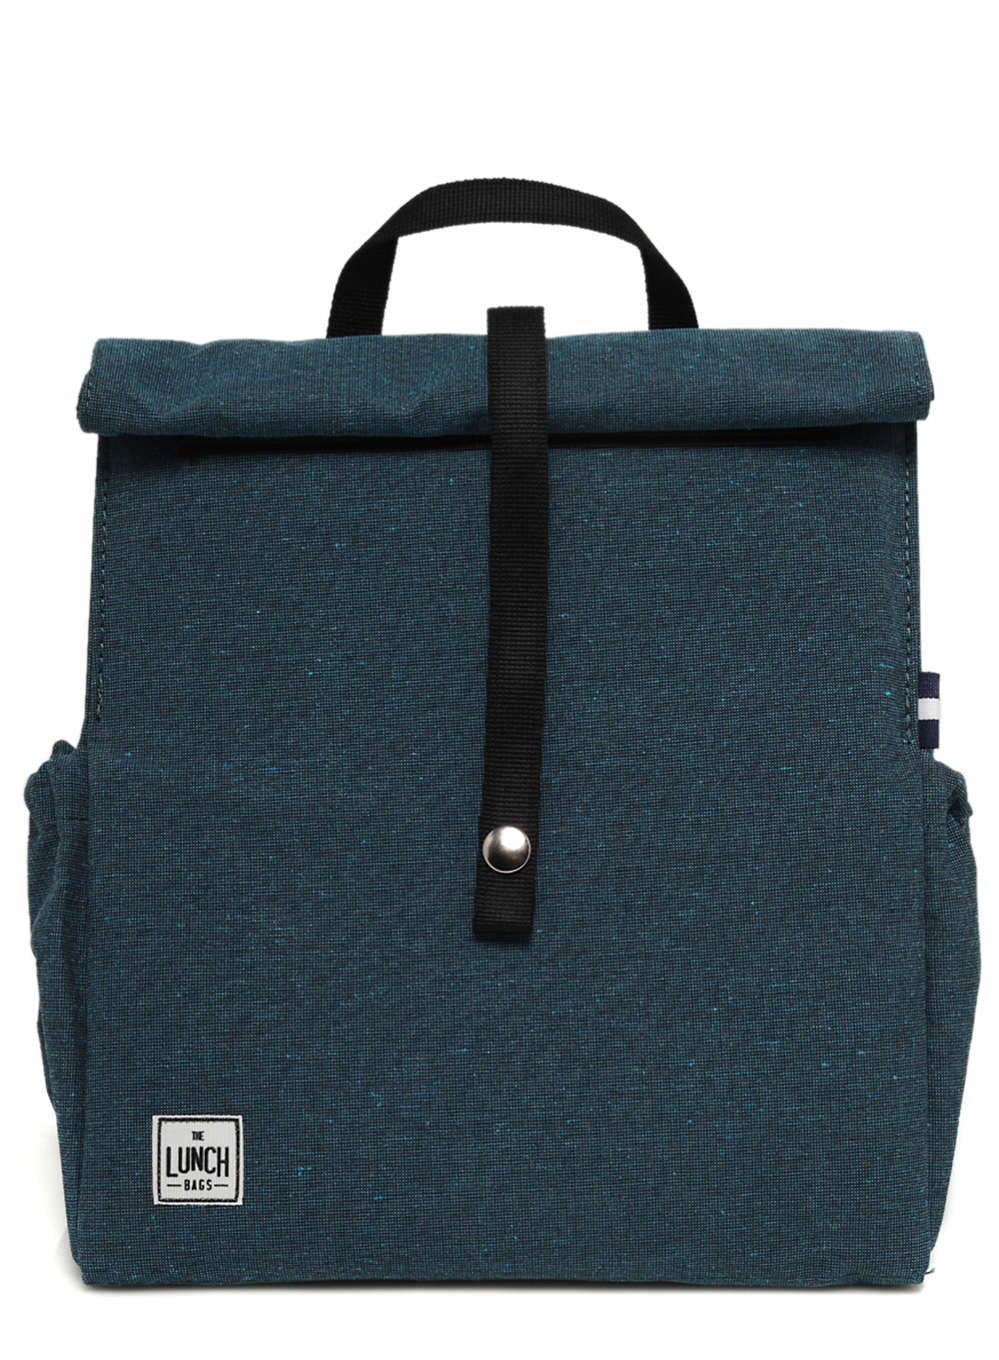 Plecak The Lunch Bags Lunchpack - deep teal